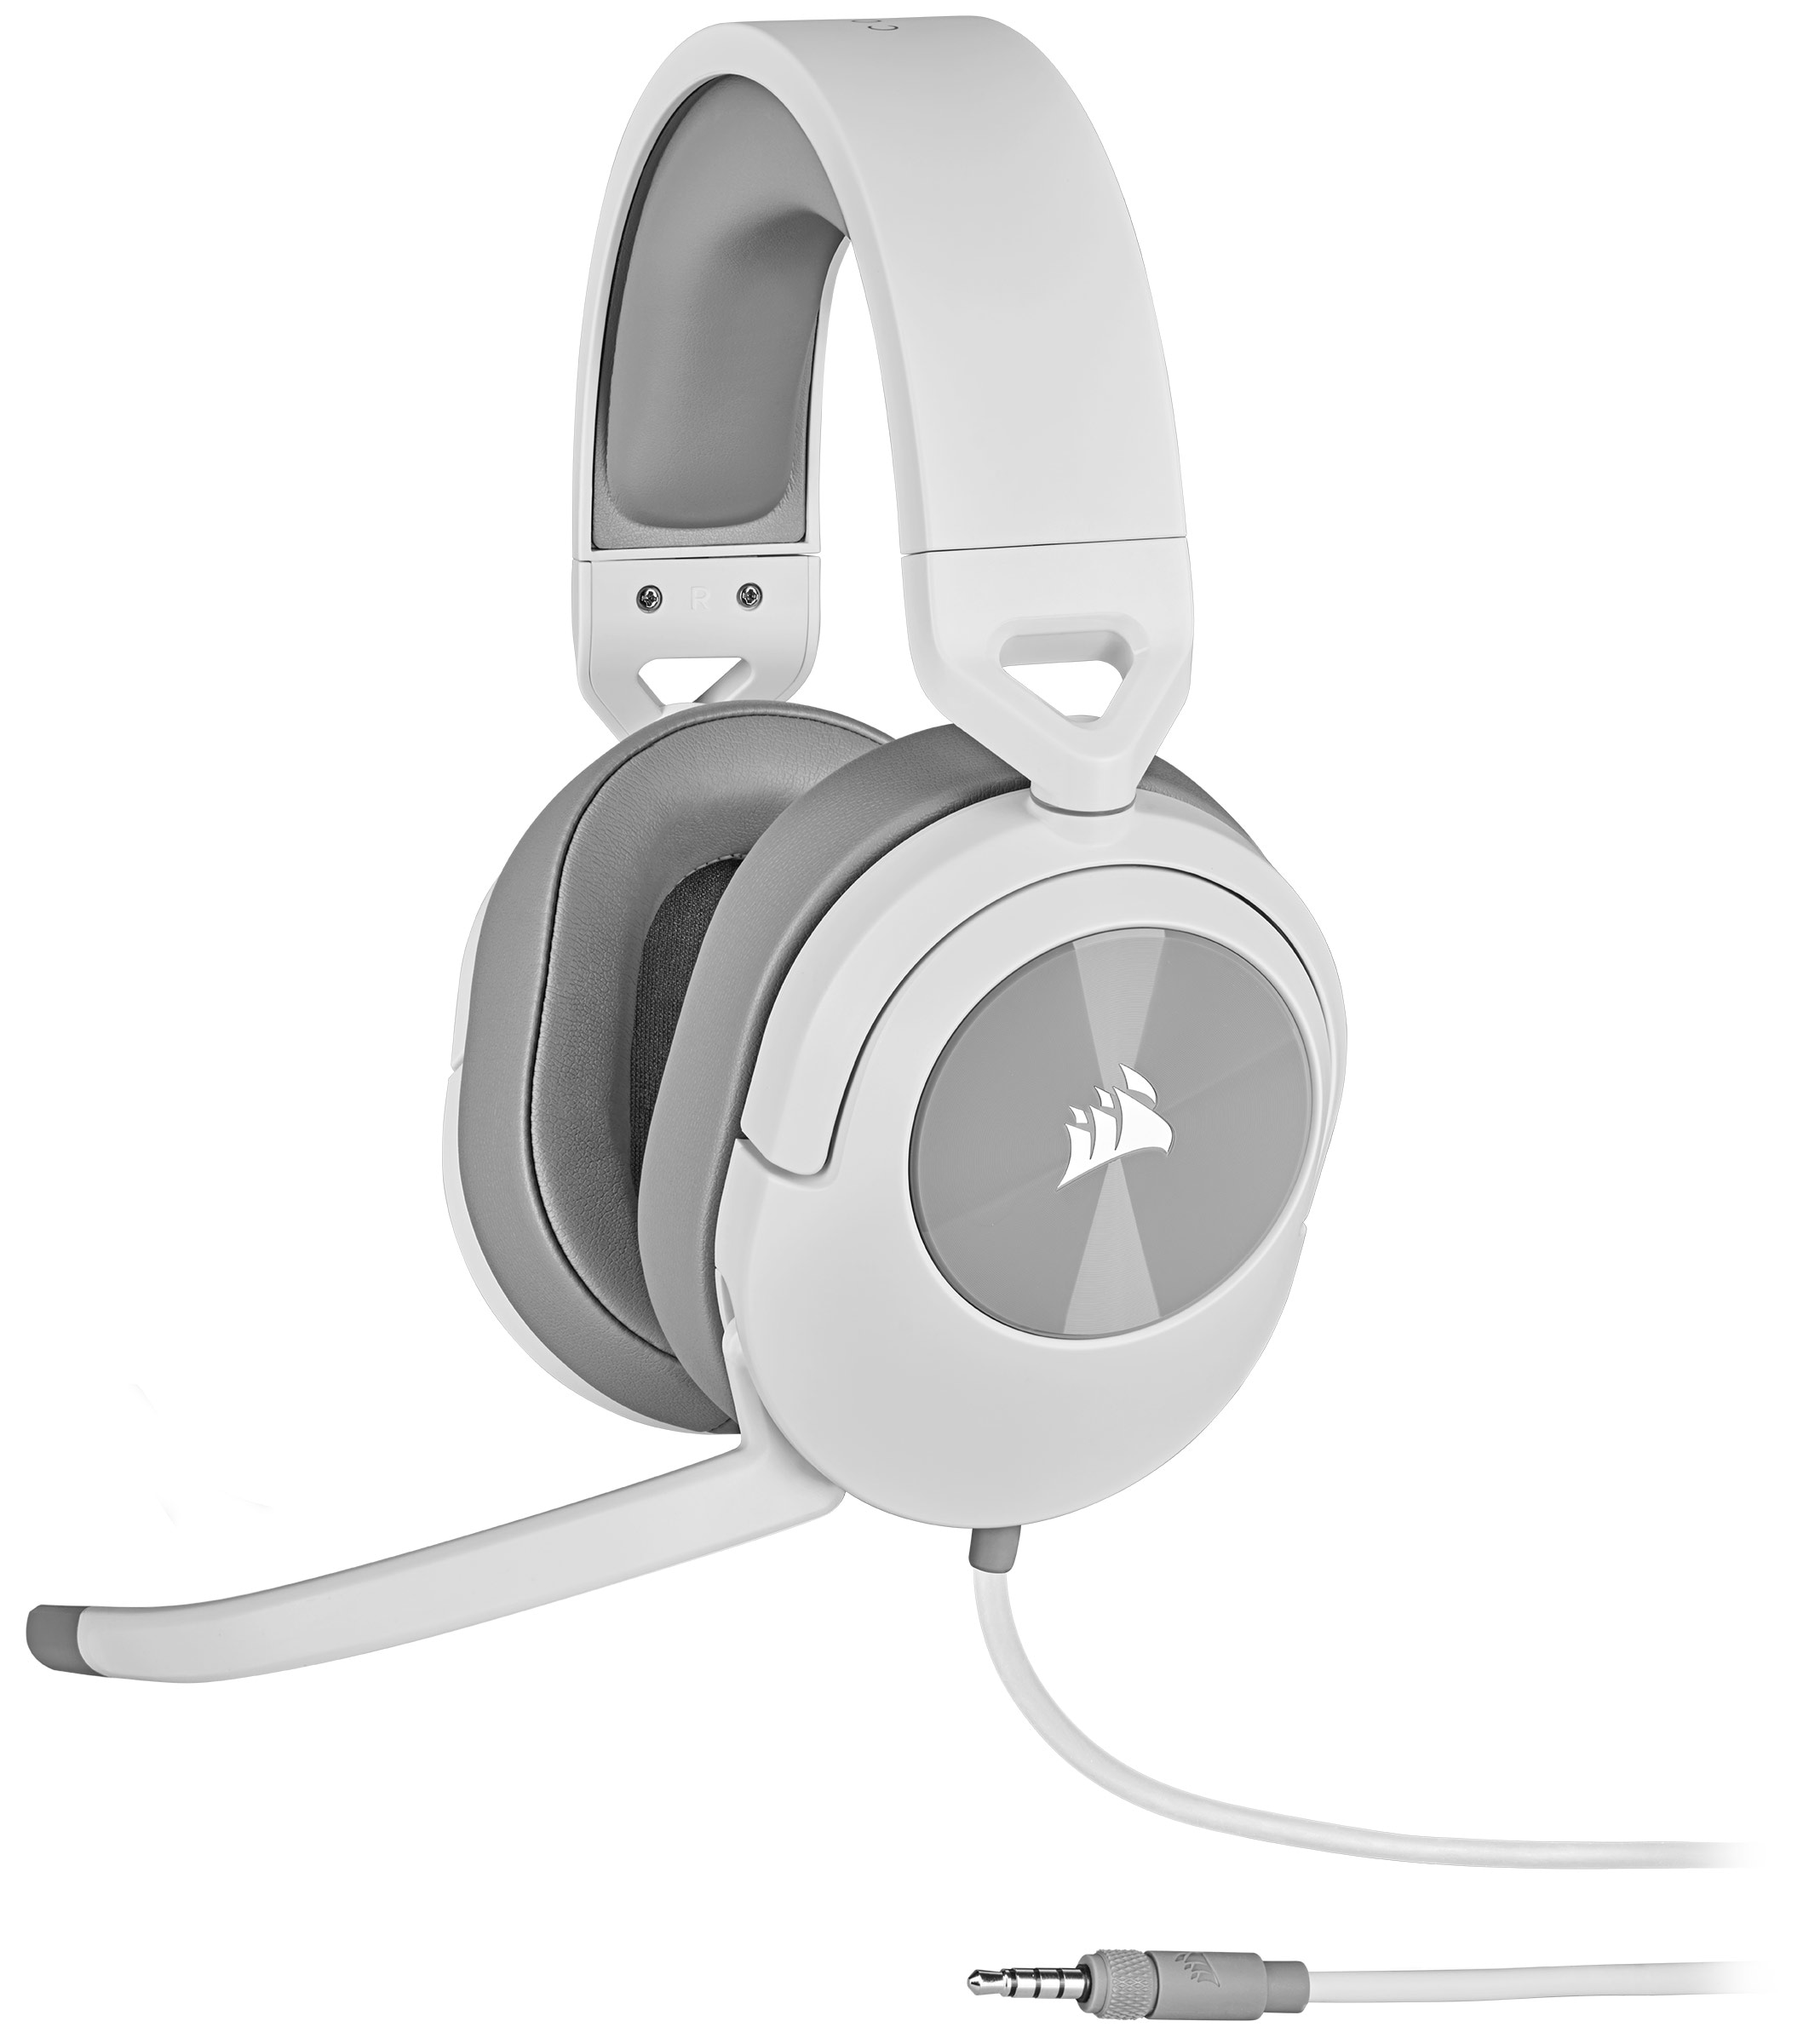 | UNIVERSAL Stereo kaufen »HS55 Carbon« Gaming-Headset Corsair